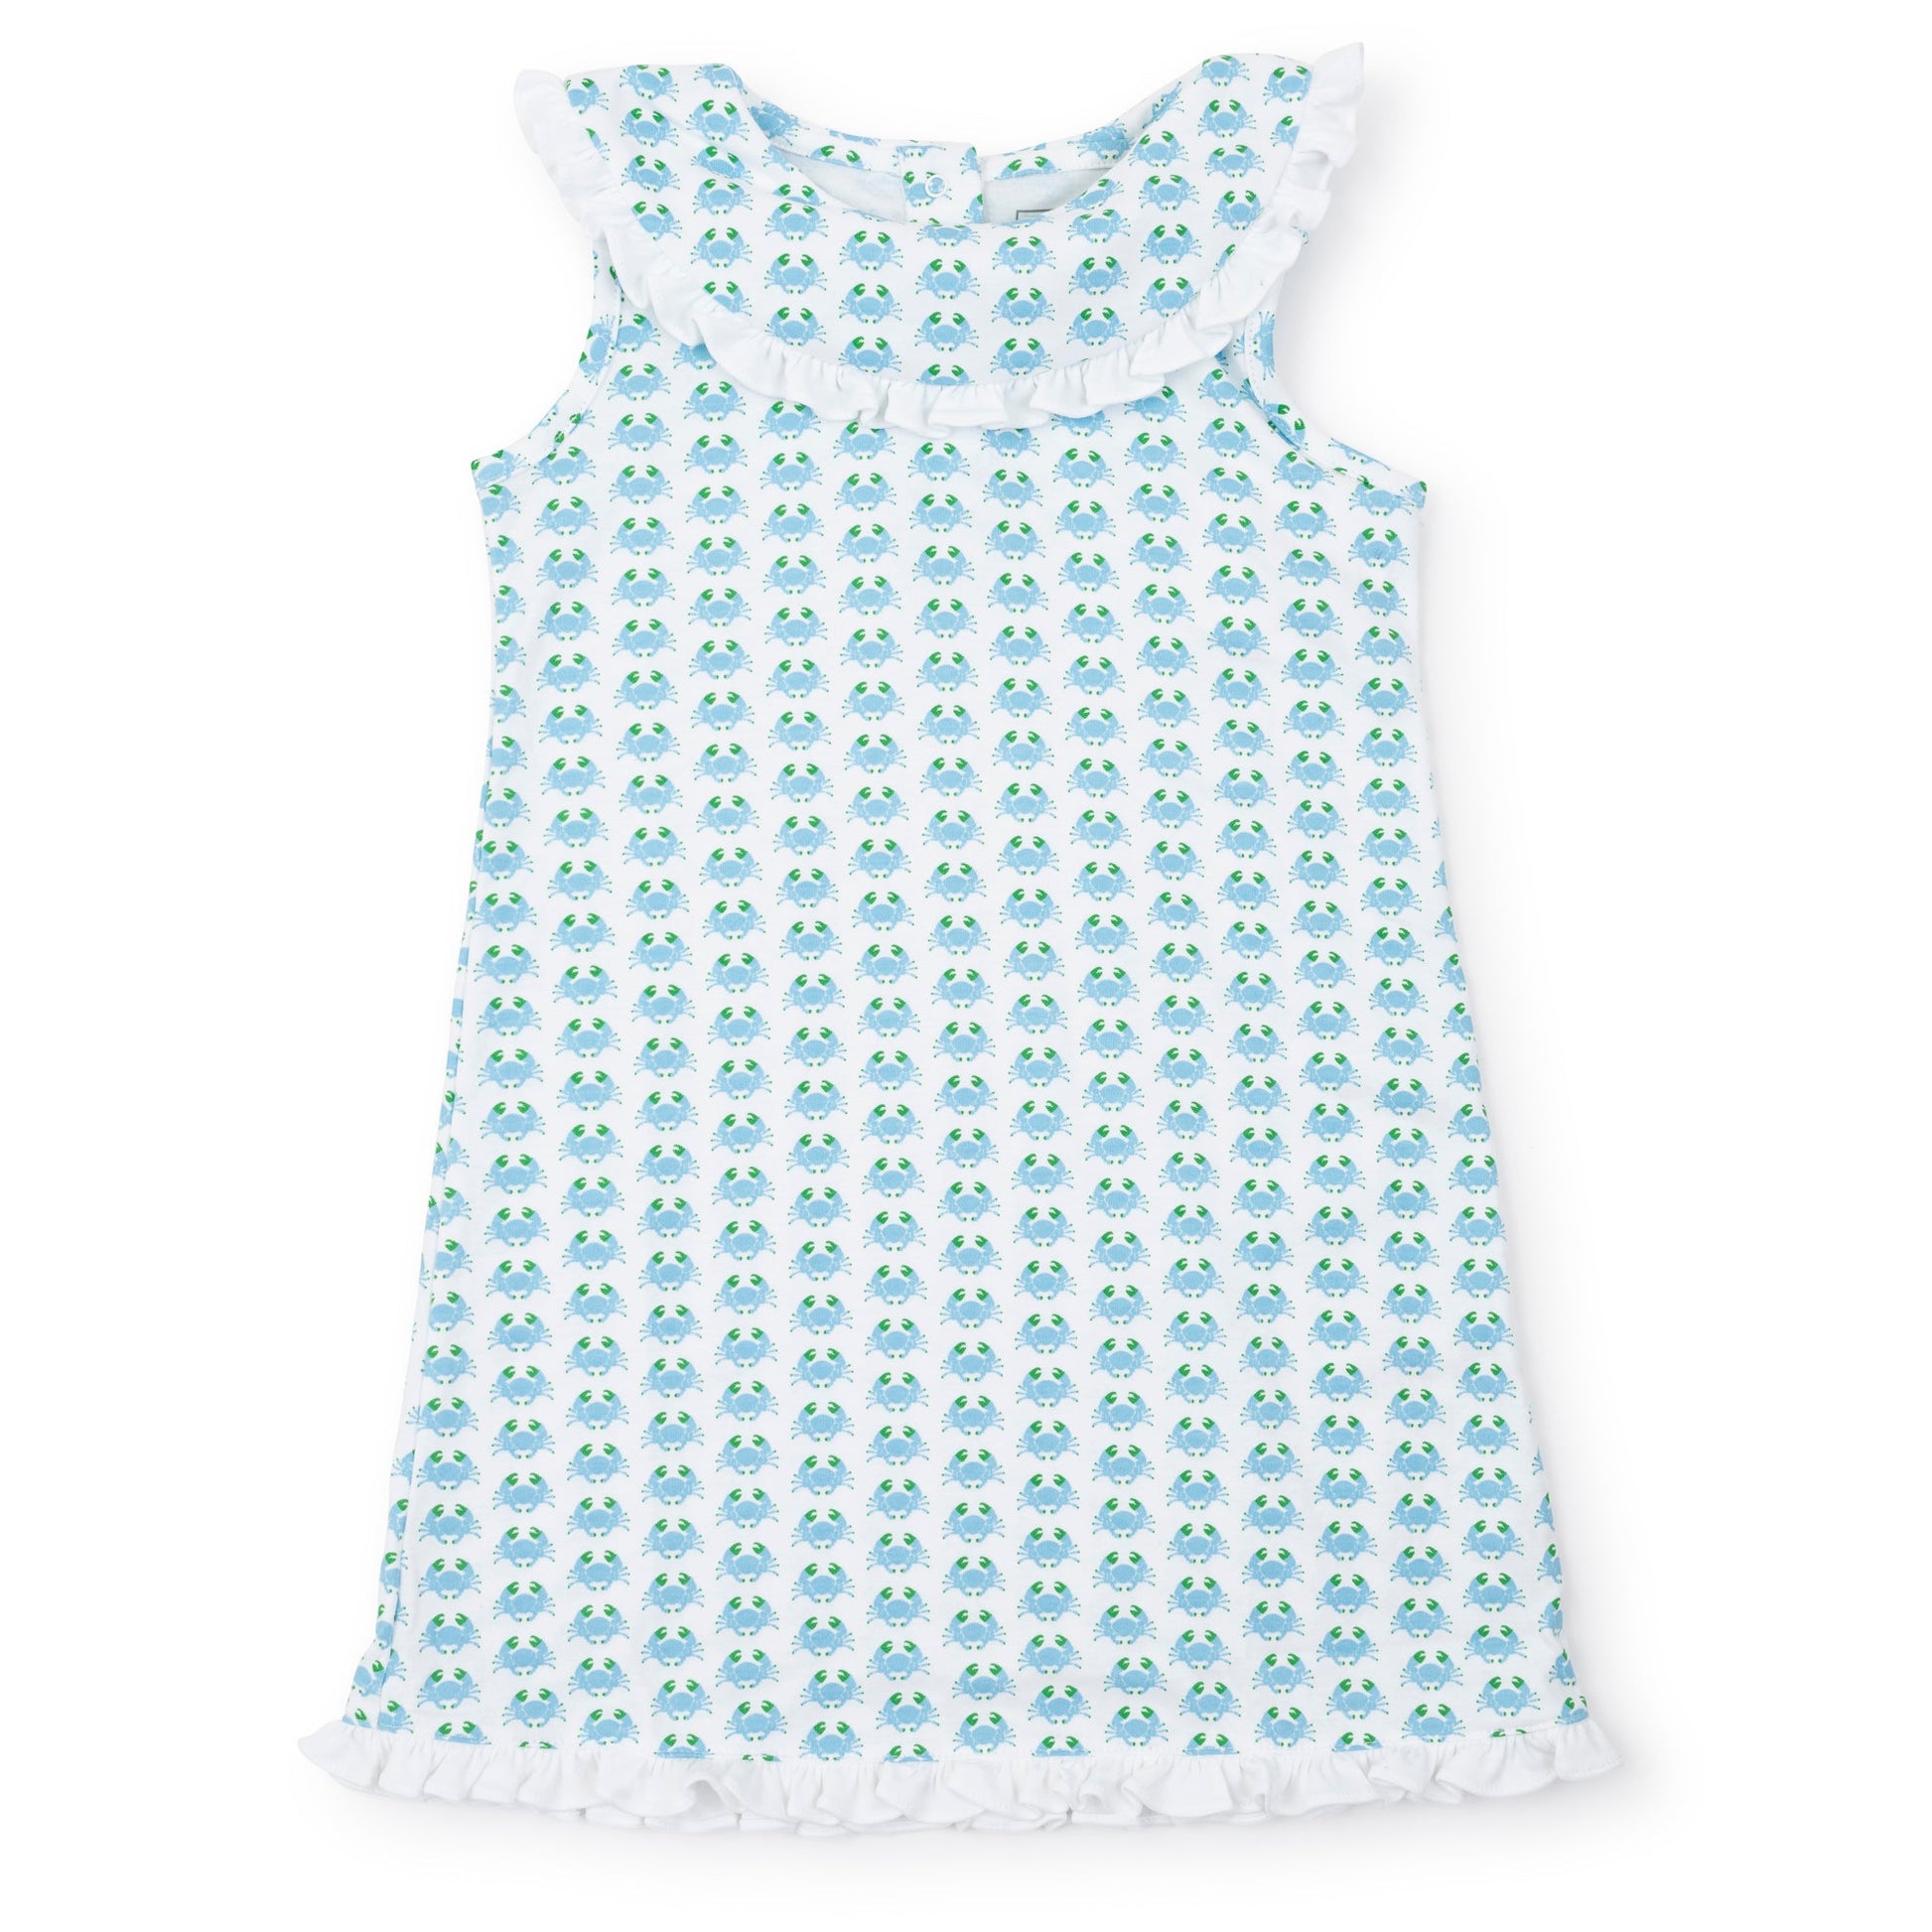 Lila and Hayes Maris Girls' Pima Cotton Dress - Cool Crabs